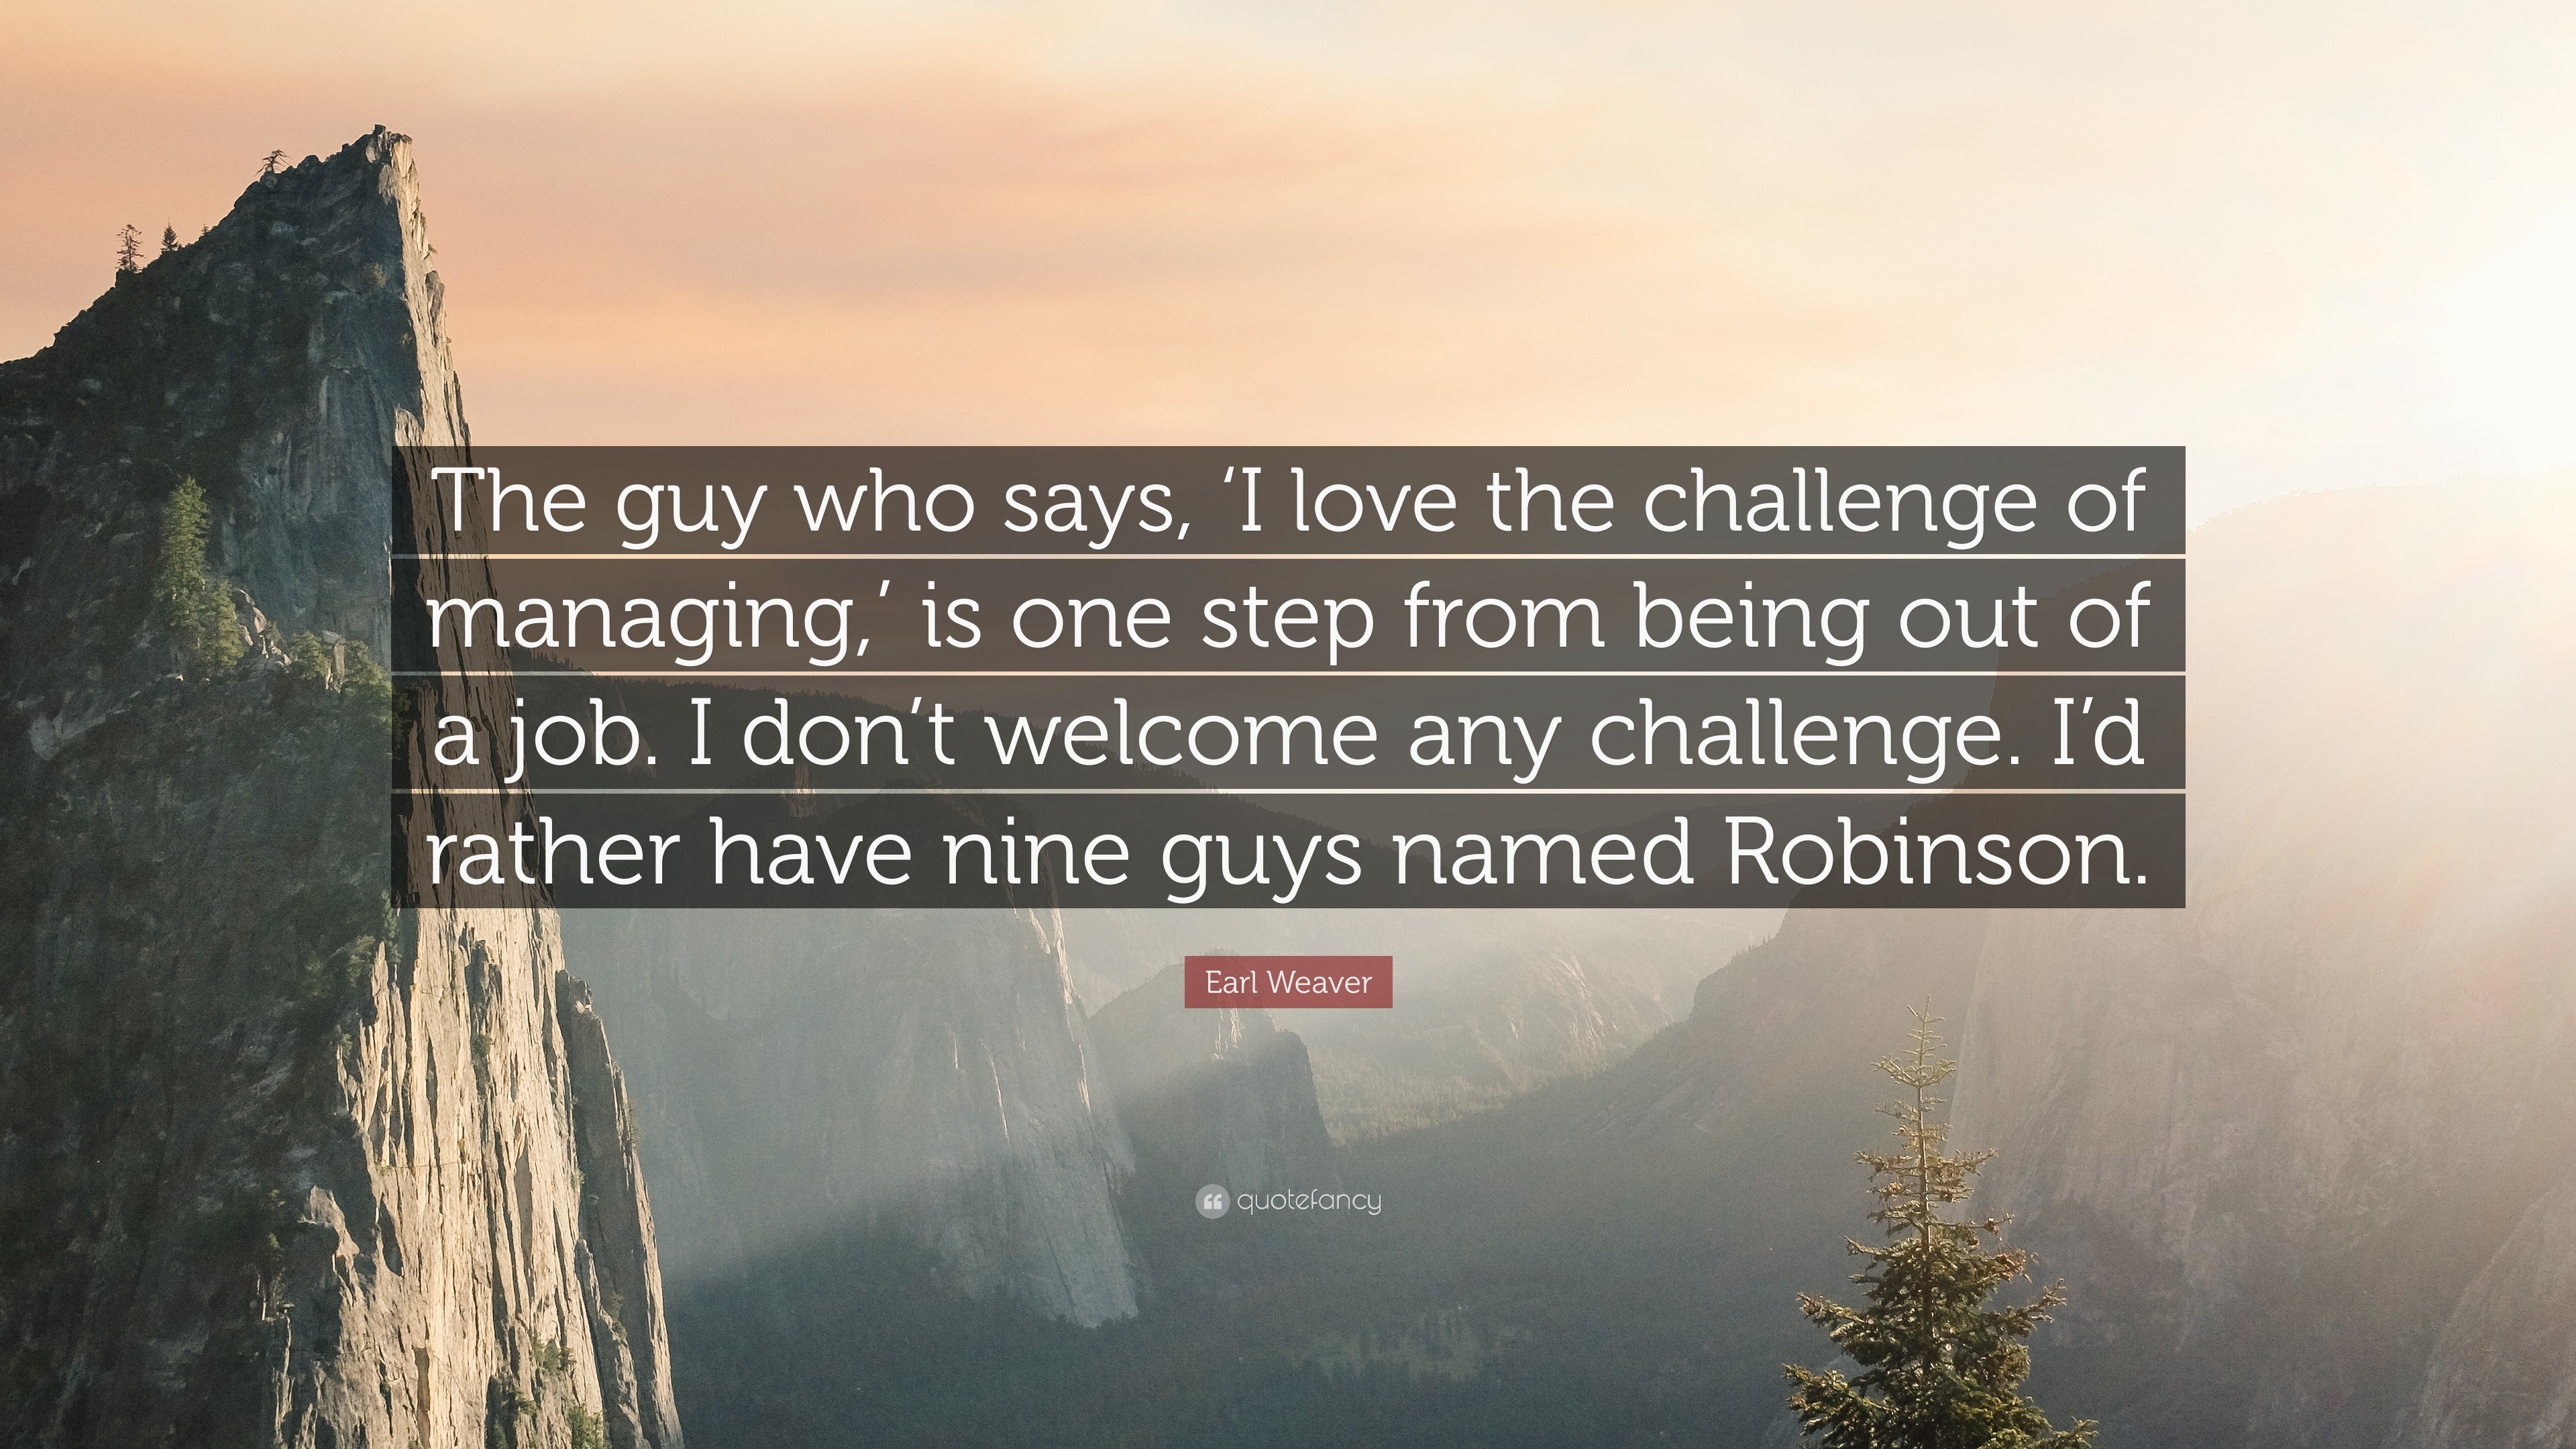 Earl Weaver Quote: “The guy who says, 'I love the challenge of